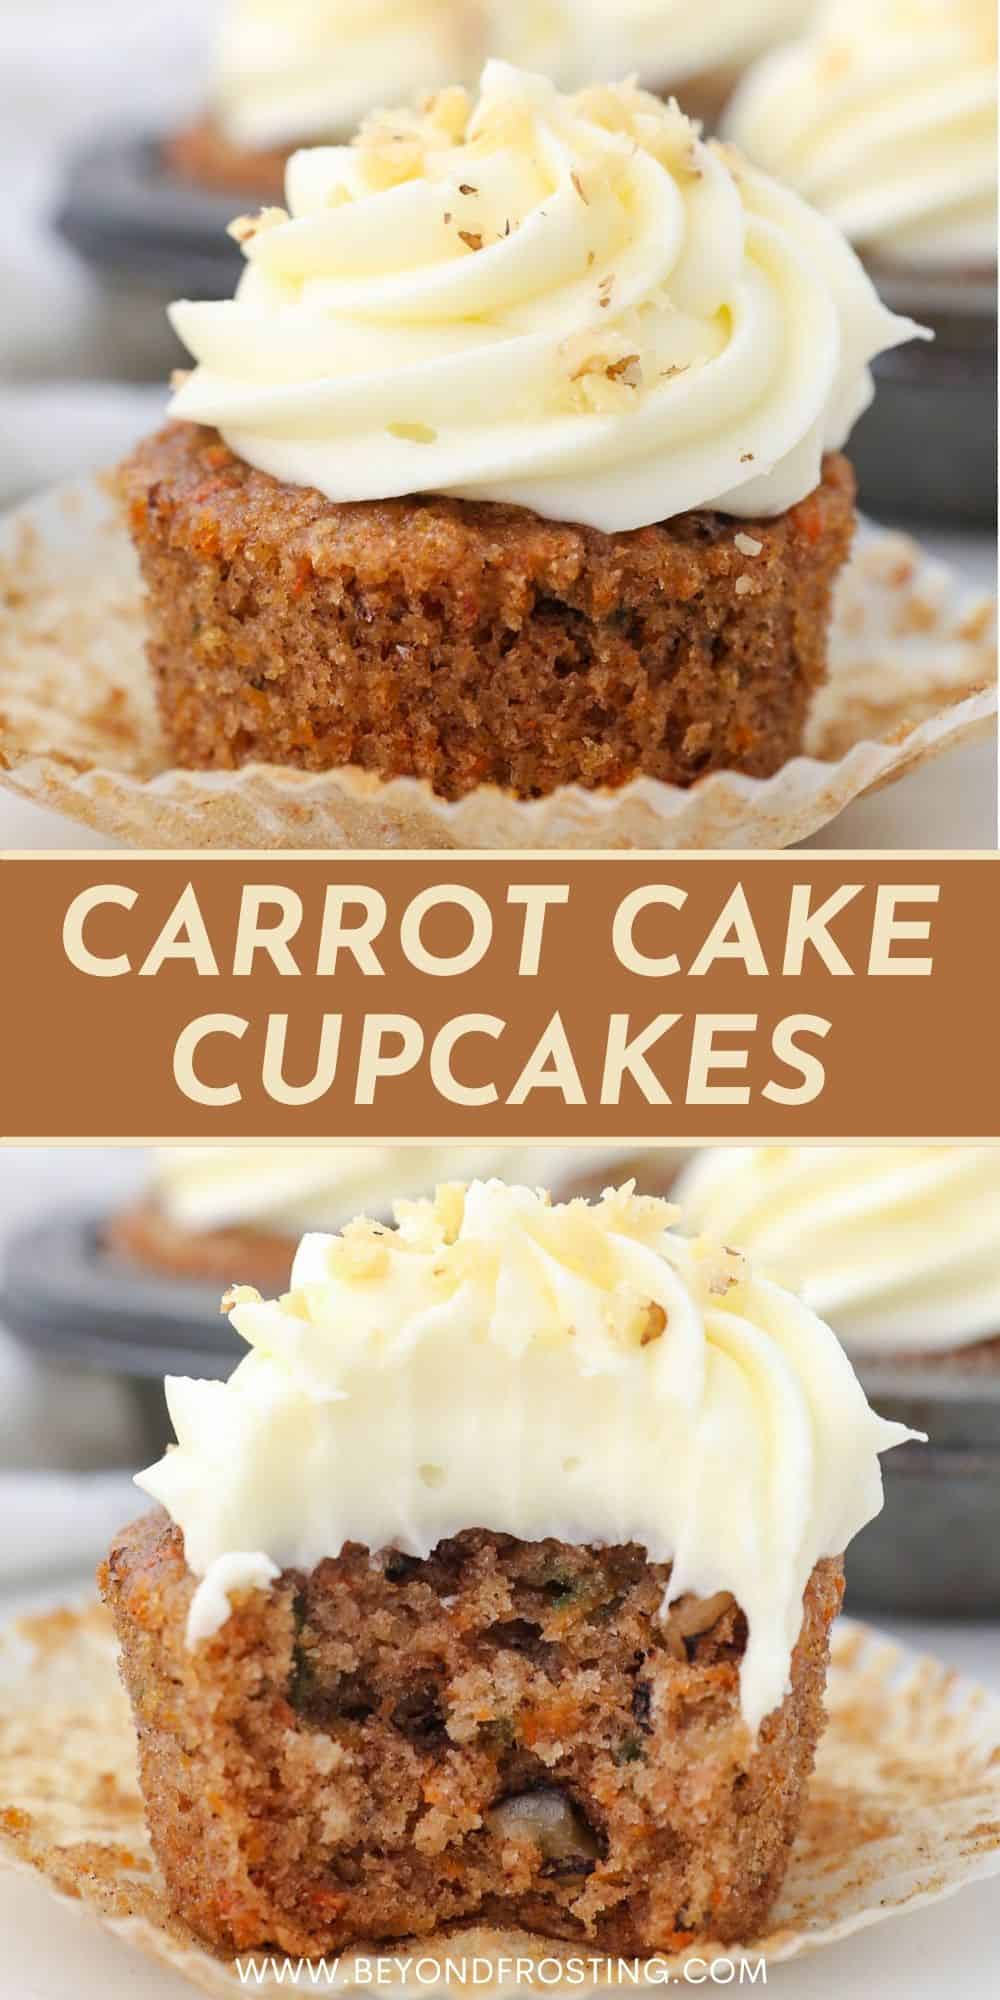 Easy Carrot Cake Cupcakes Recipe | Beyond Frosting